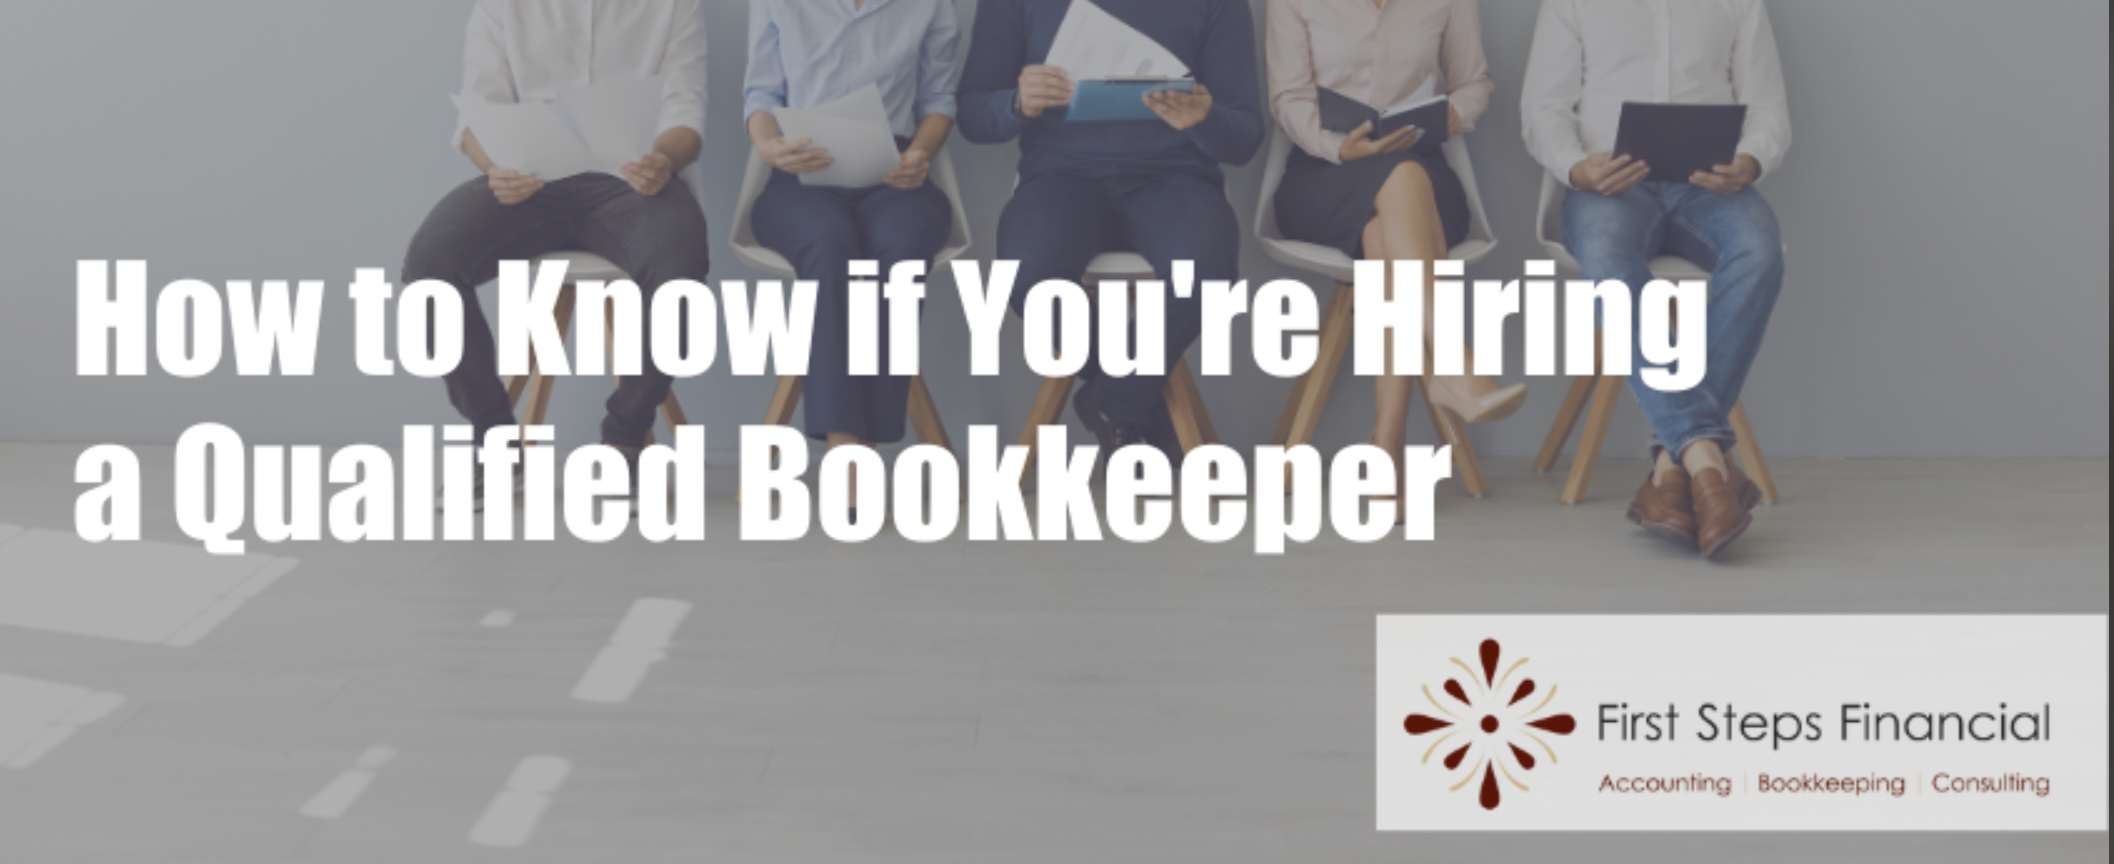 How to Know if You’re Hiring a Qualified Bookkeeper